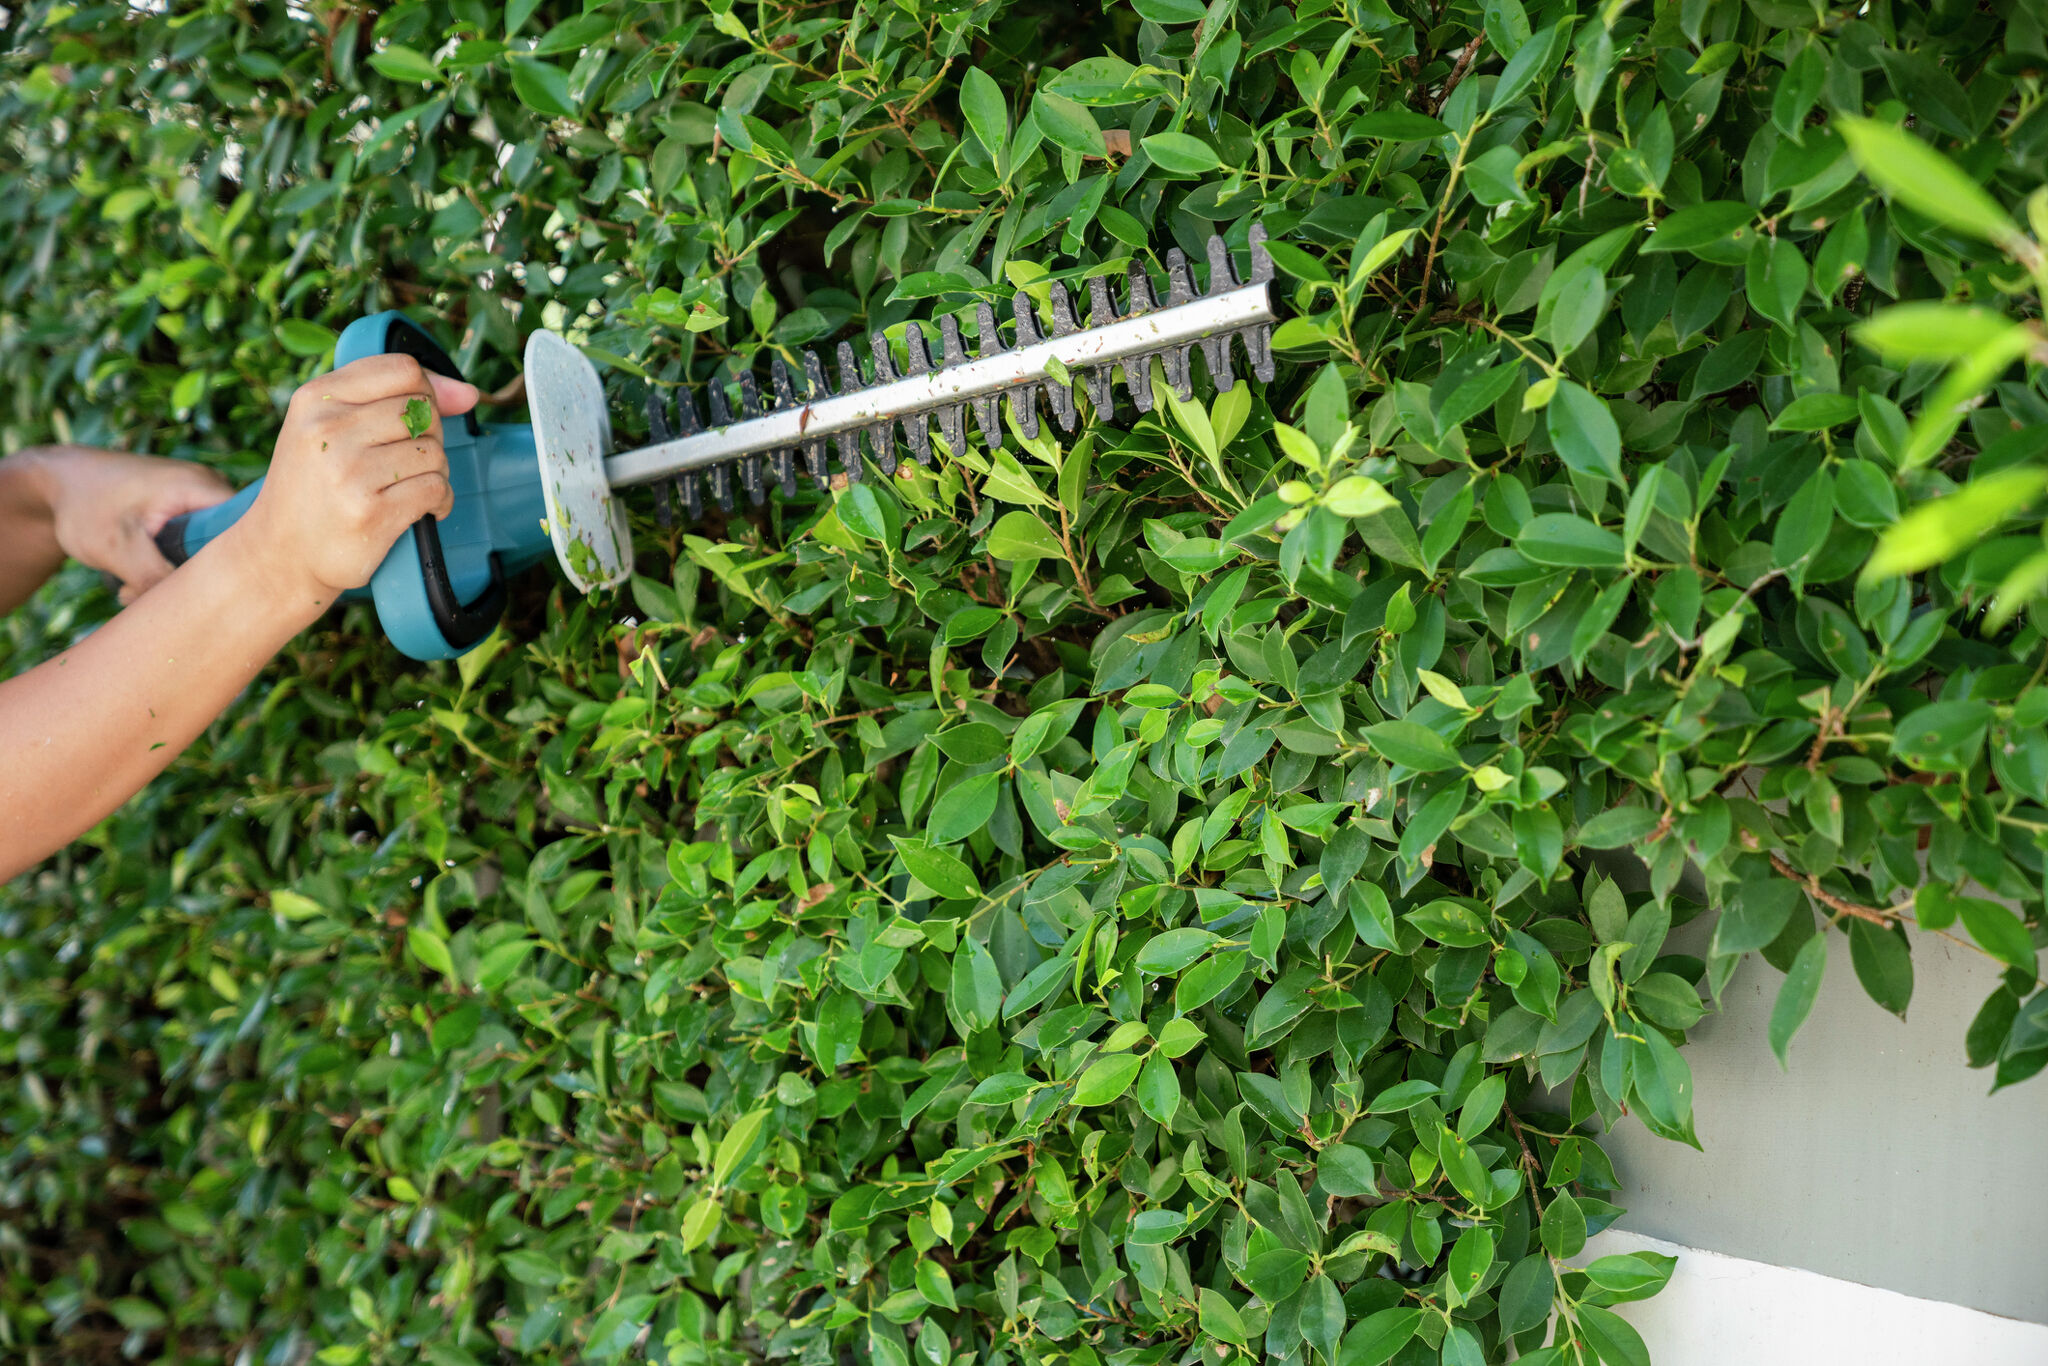 Finding Your Ideal Tree Trimmer in No Time!